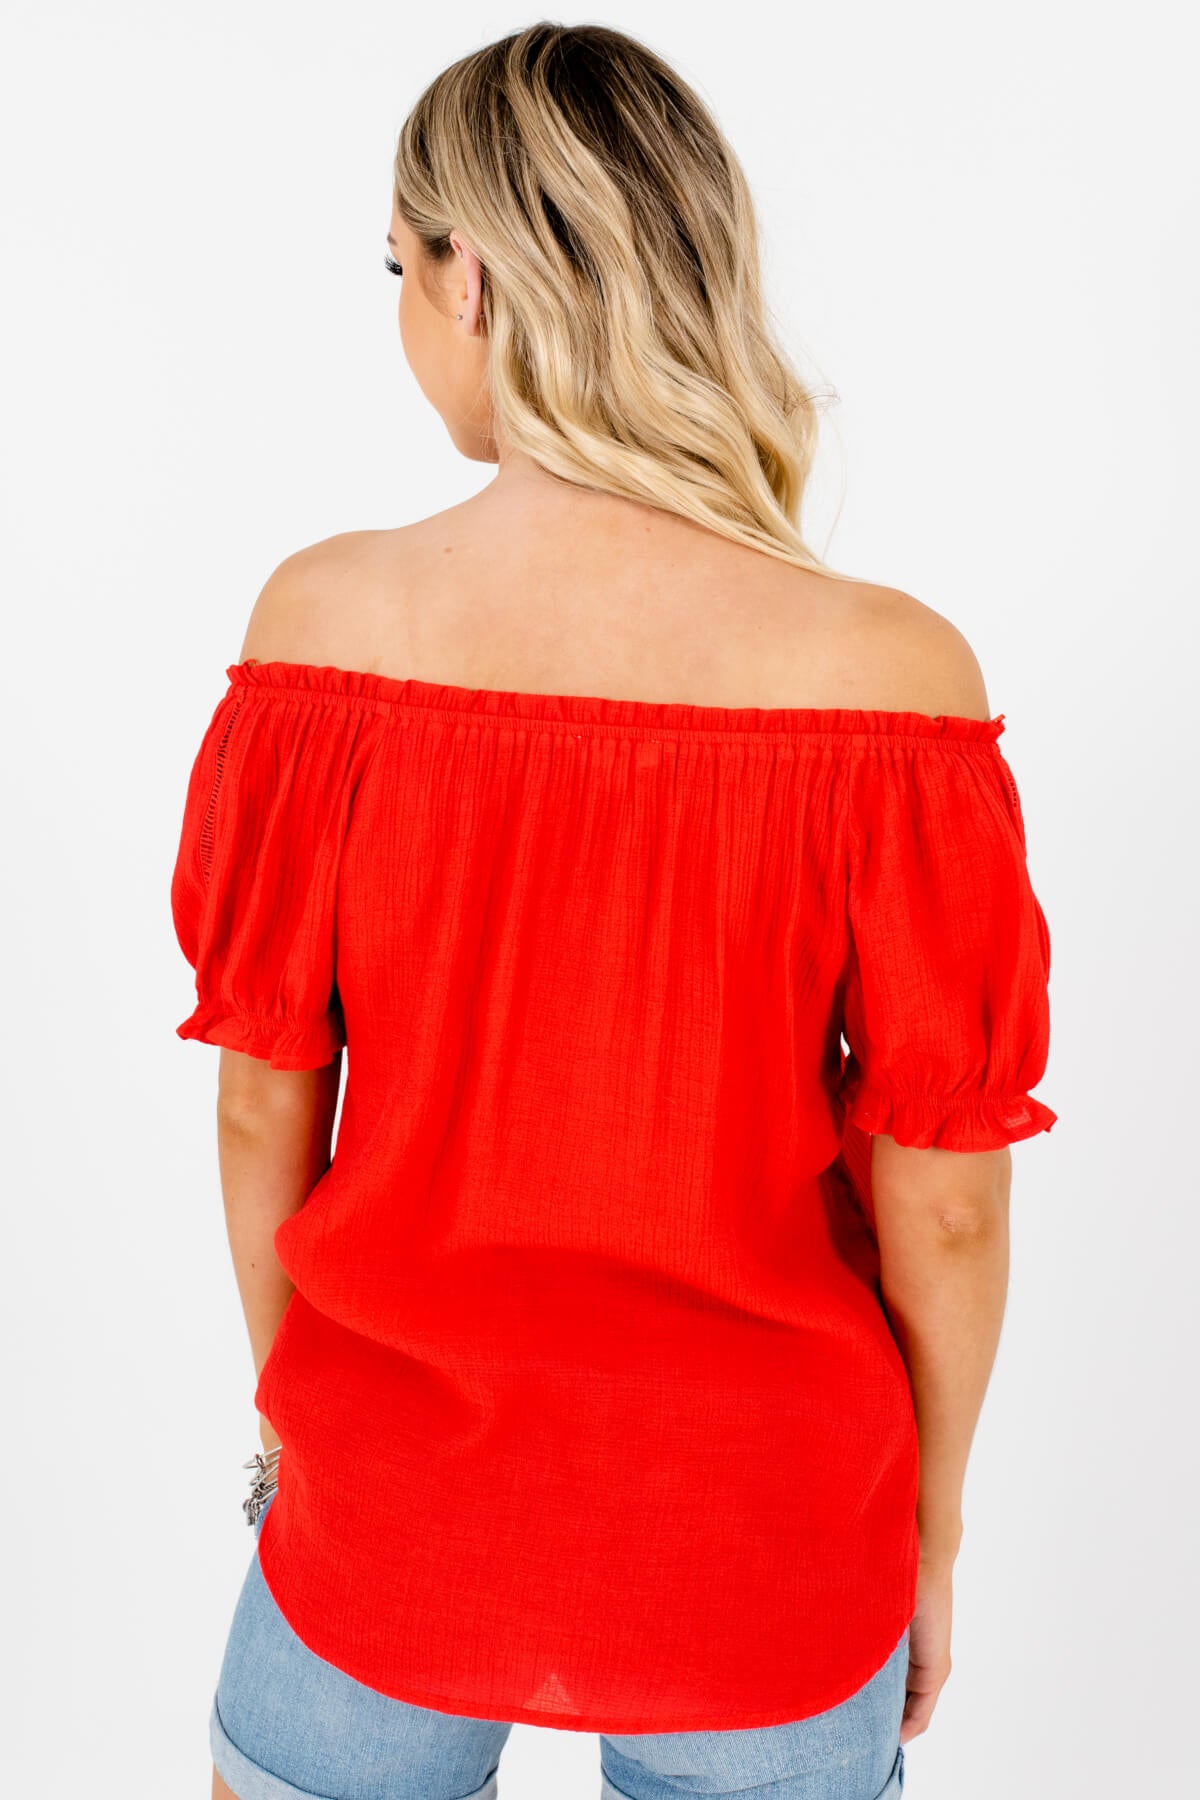 Women's Red Puff Sleeve Style Boutique Blouse